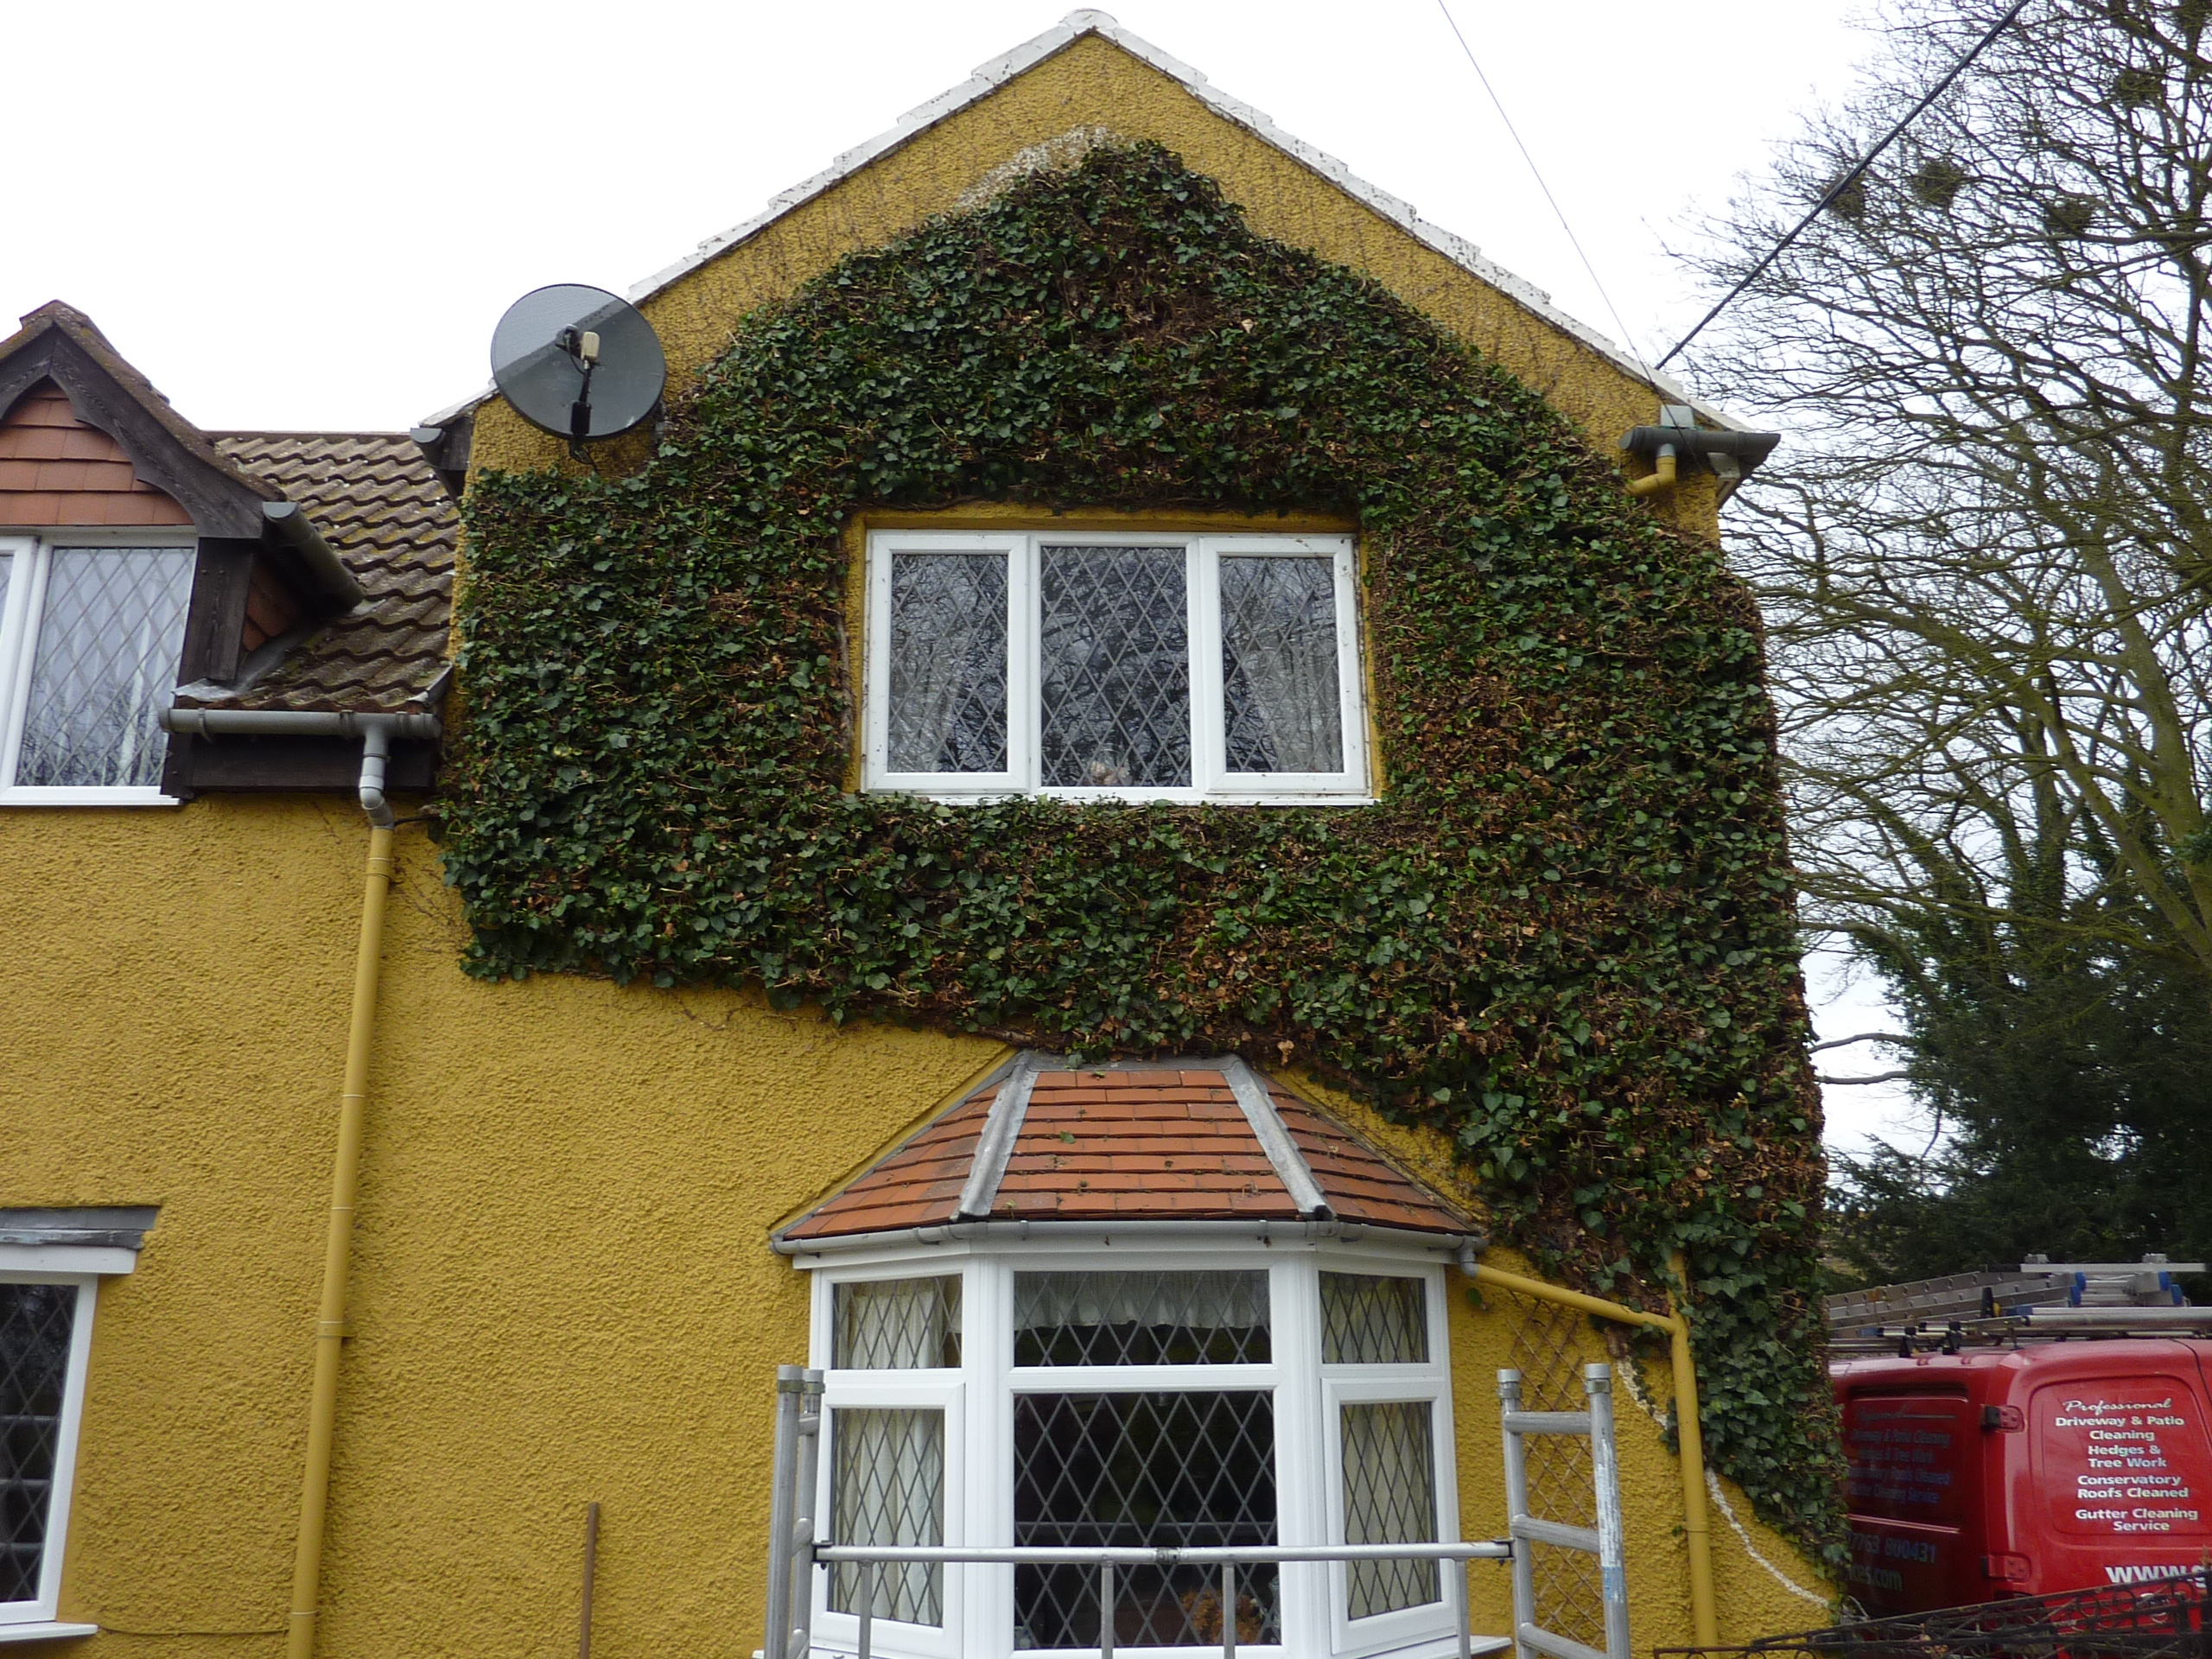 cutting back overgrown ivy